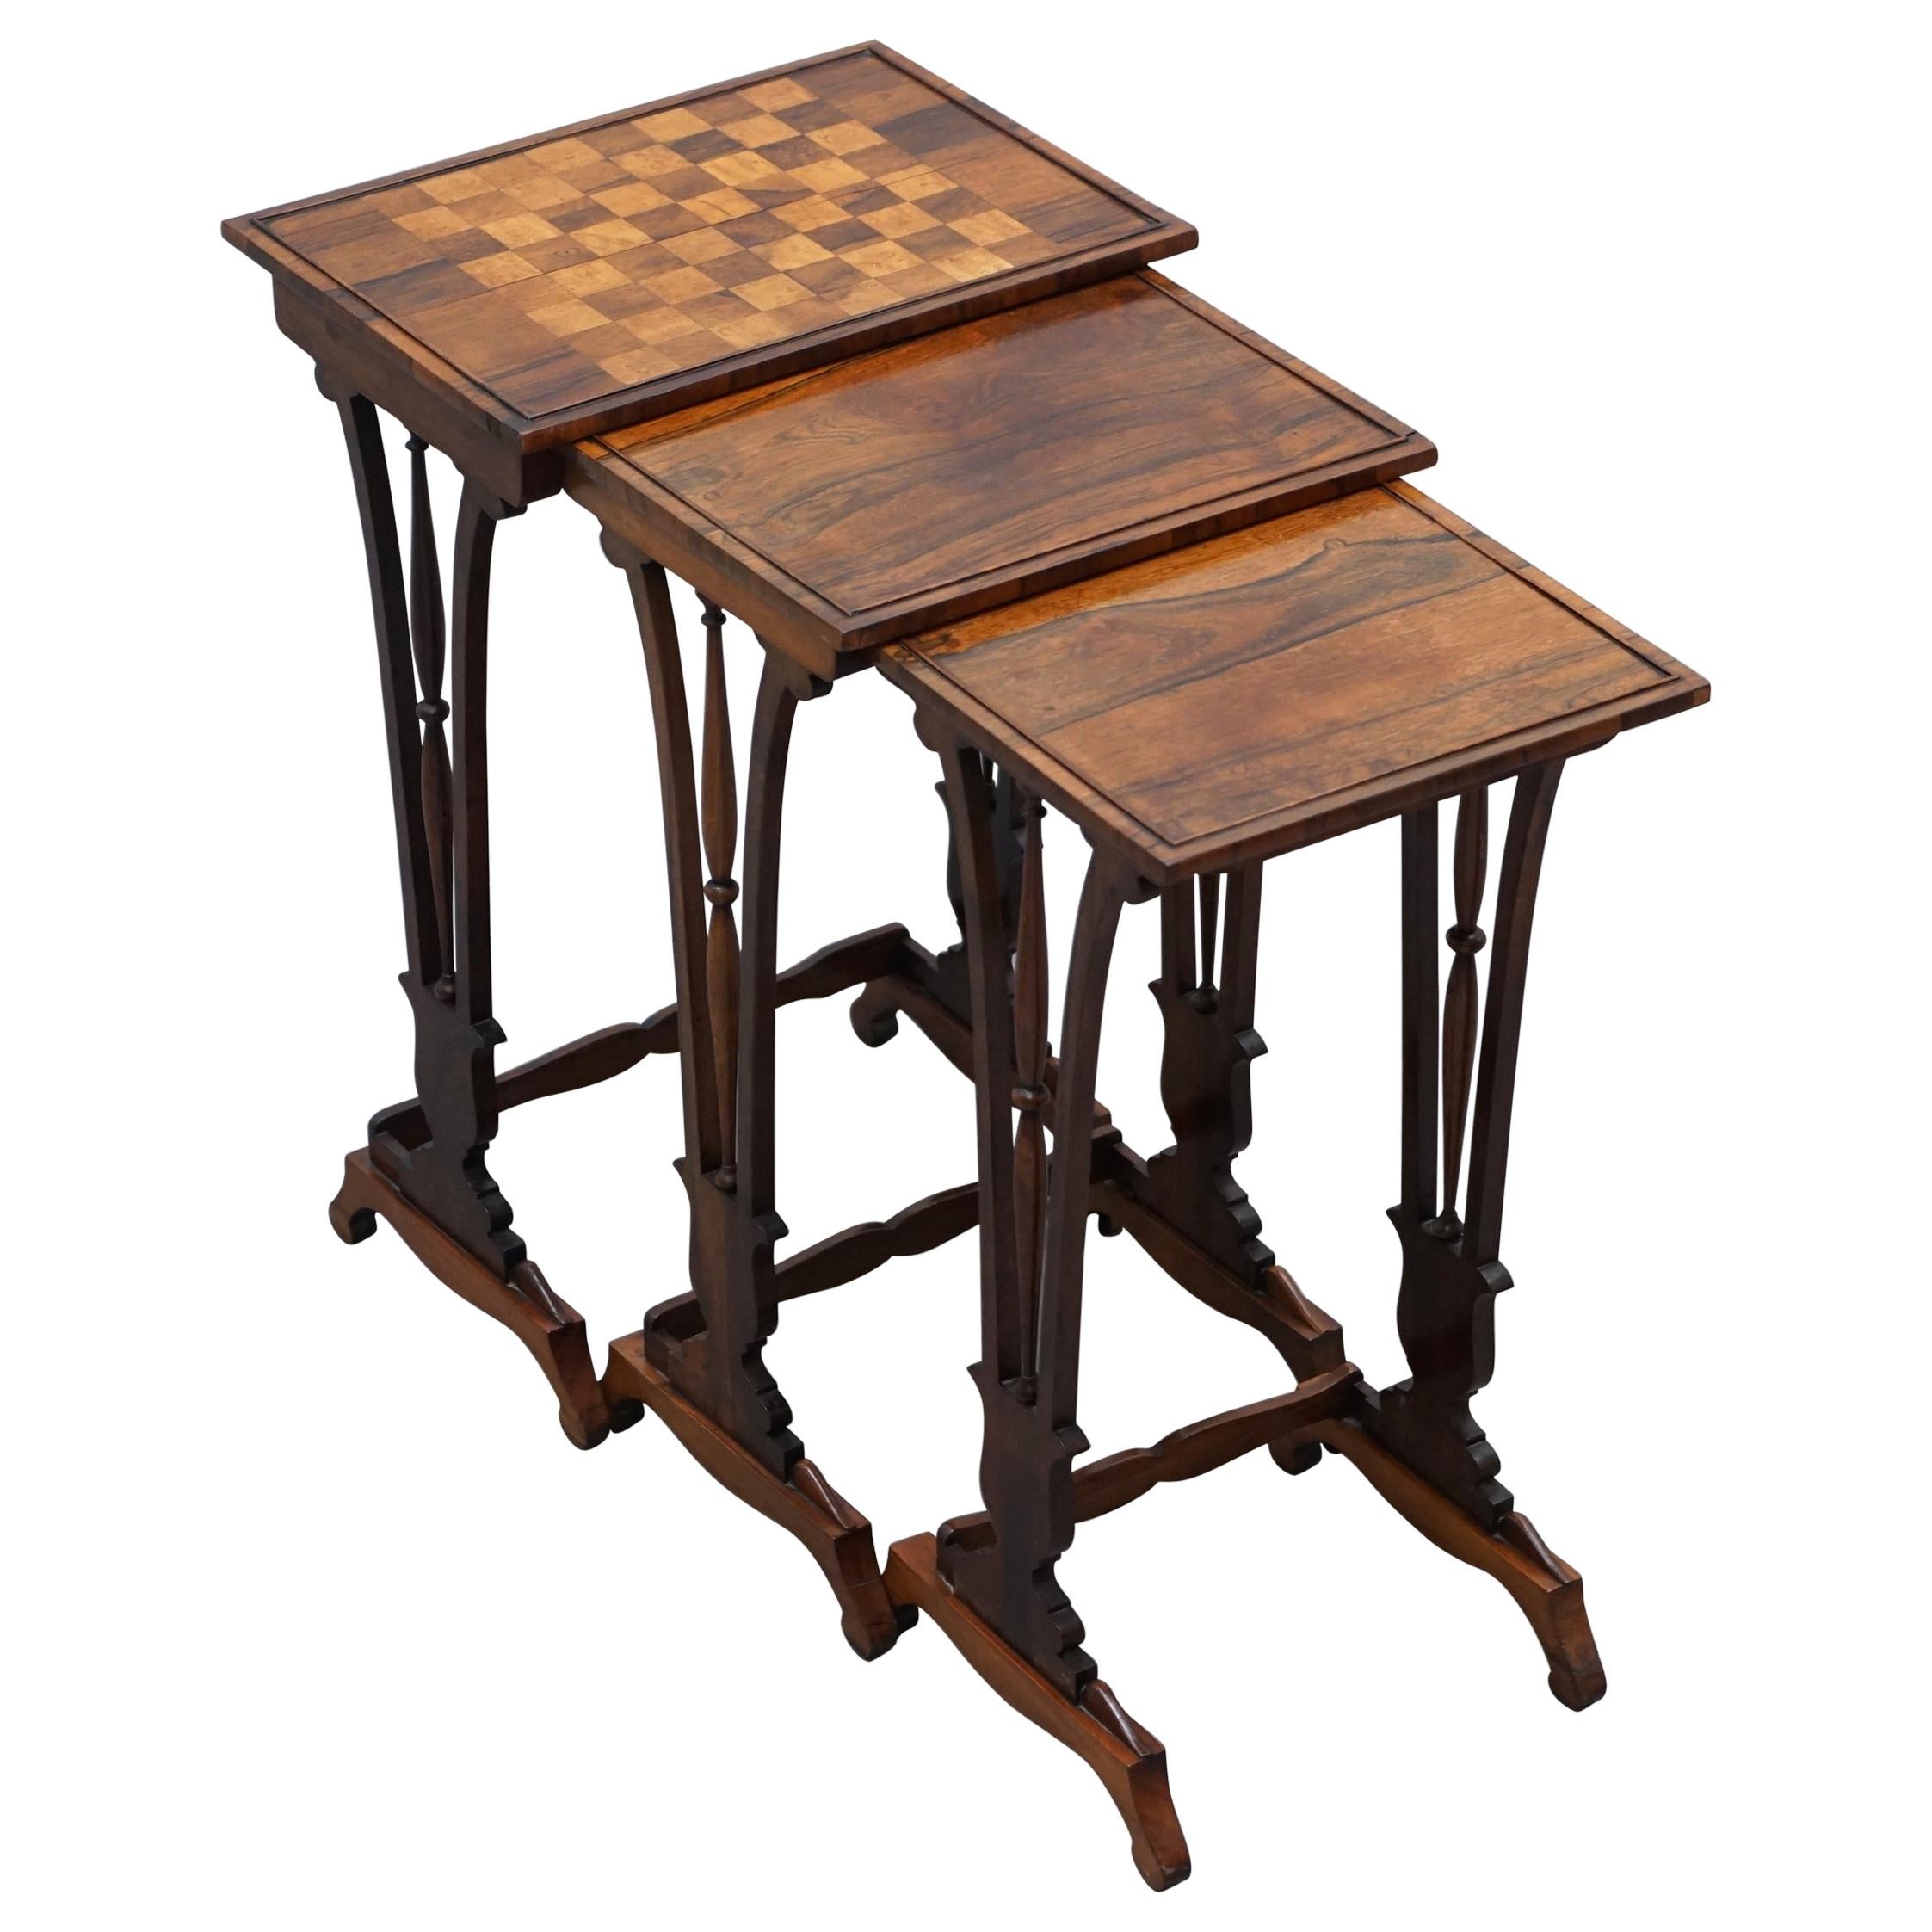 Fine Regency Nest of Hardwood Tables with Chessboard Top Attributed to Gillows For Sale